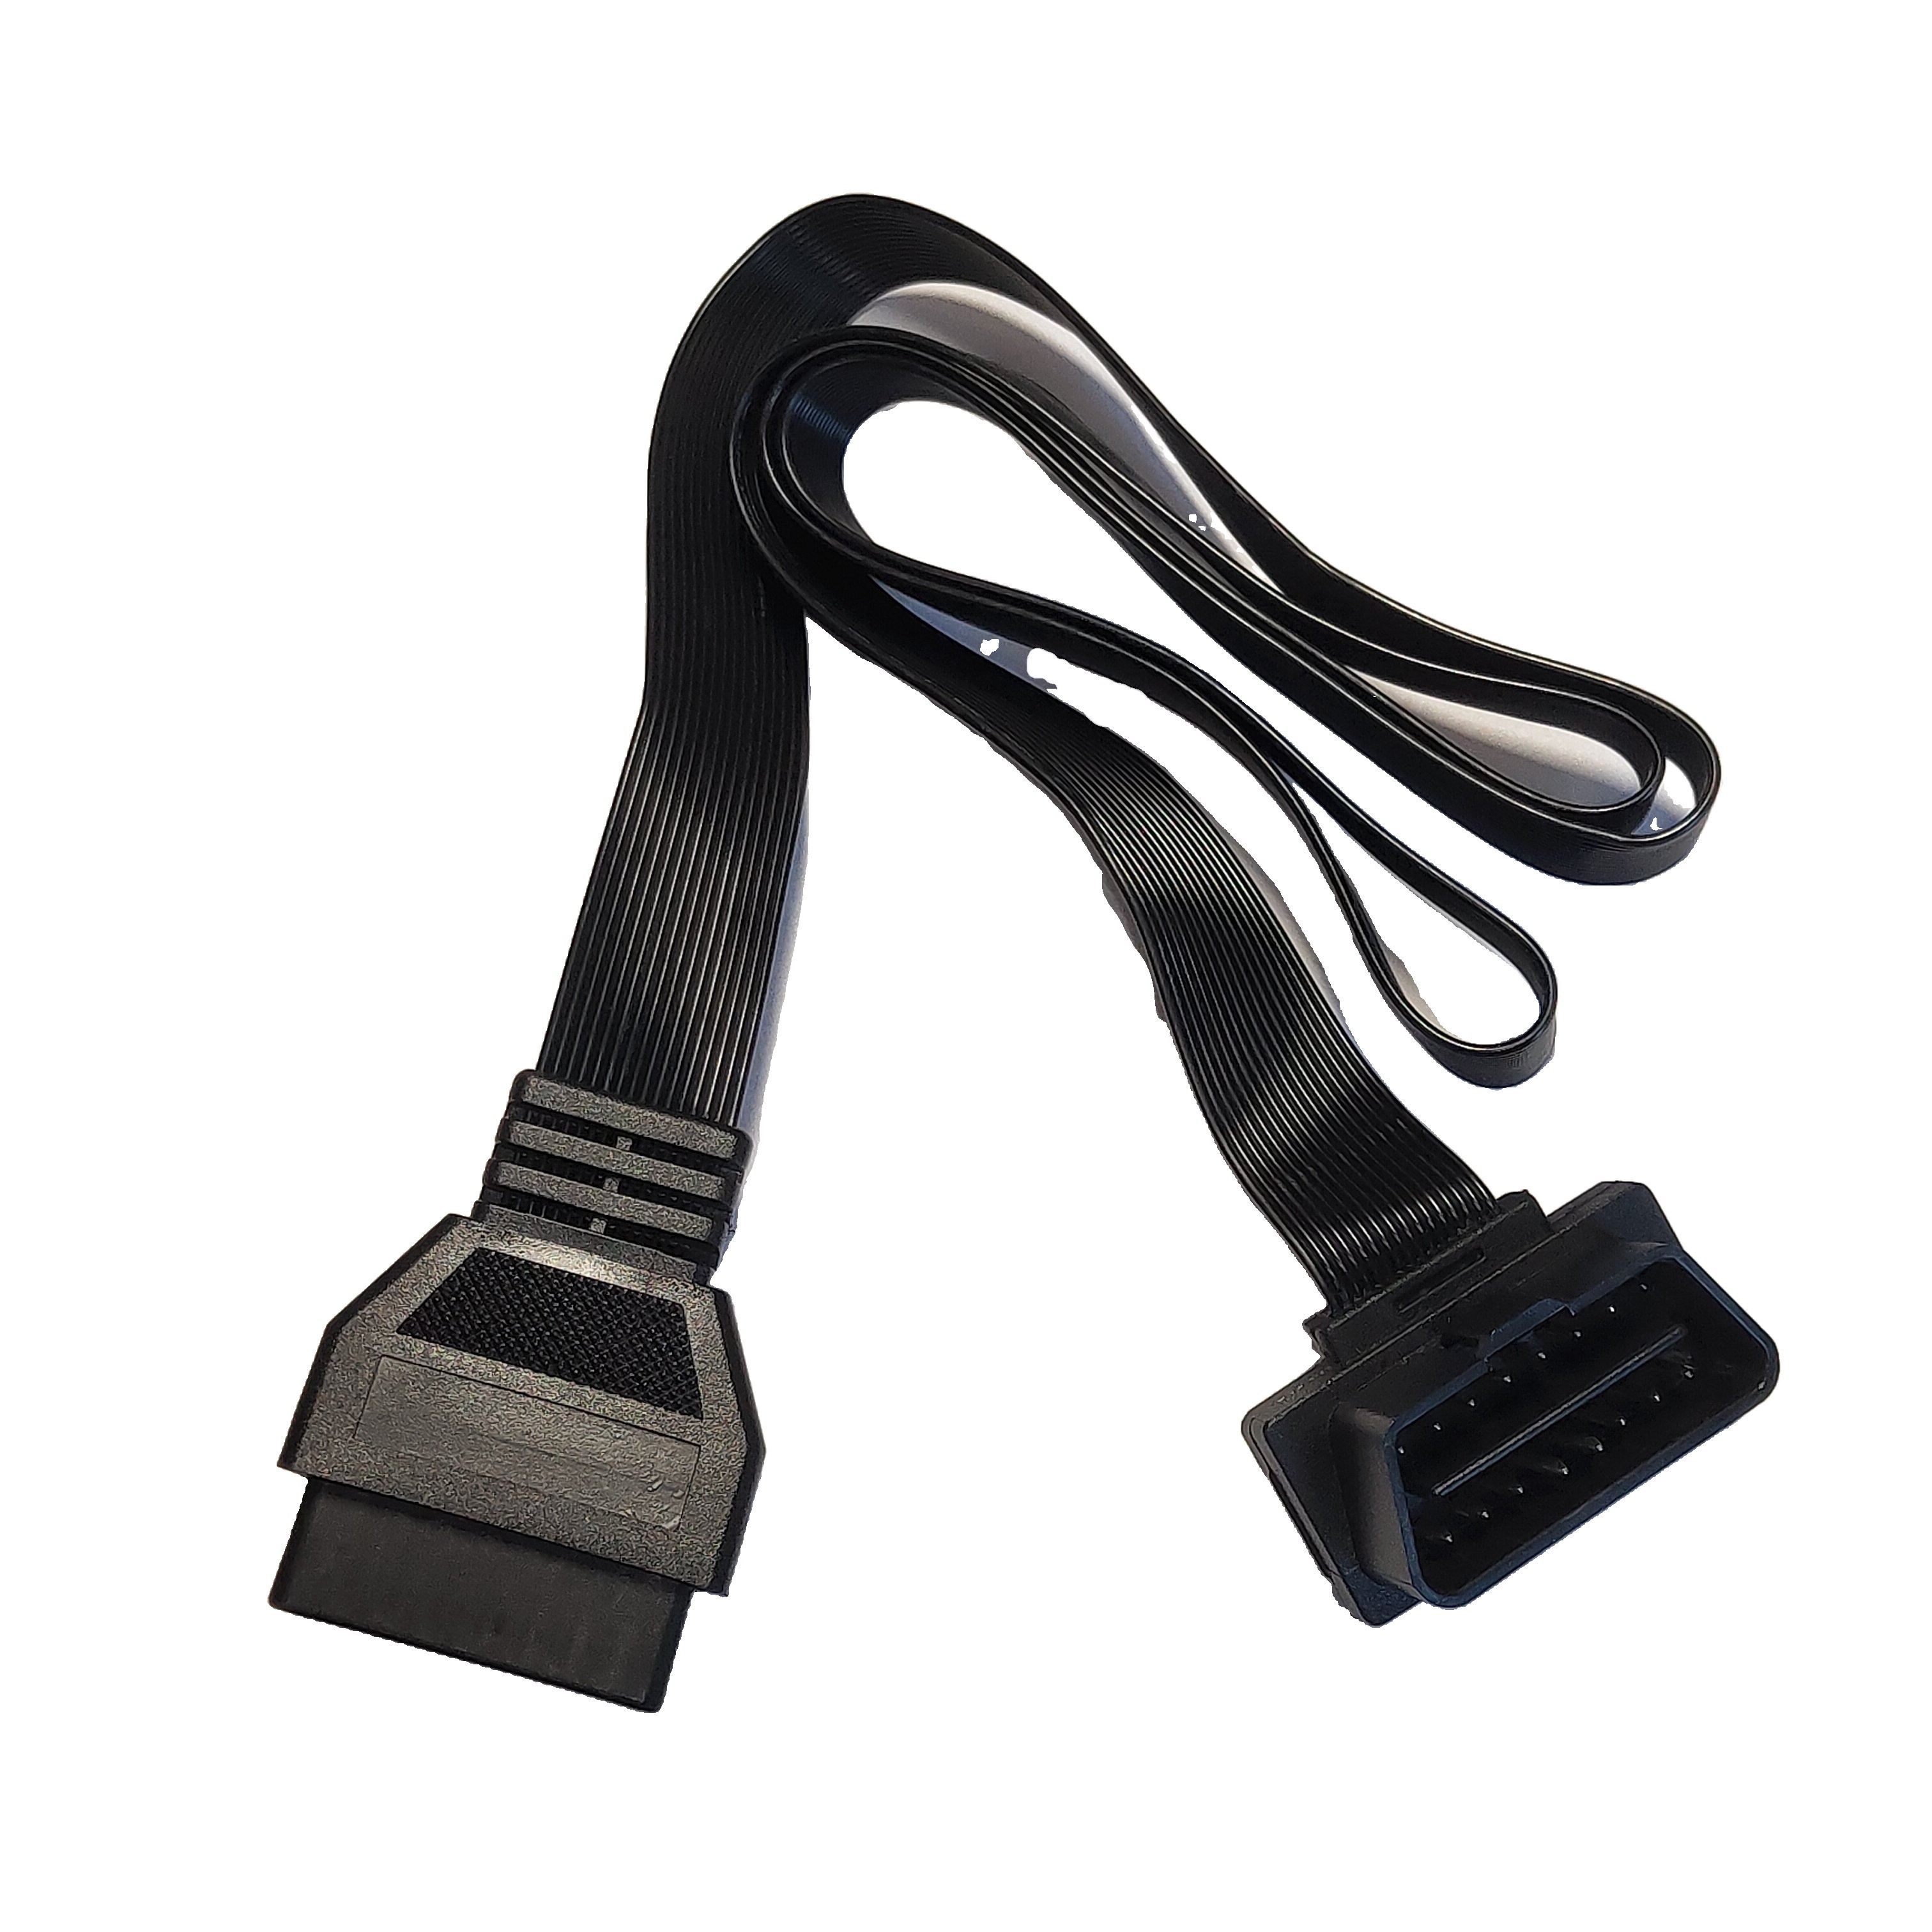 Replacement 16pin Cable for KESS V2 Miain Cable OBD2 Diagnostic